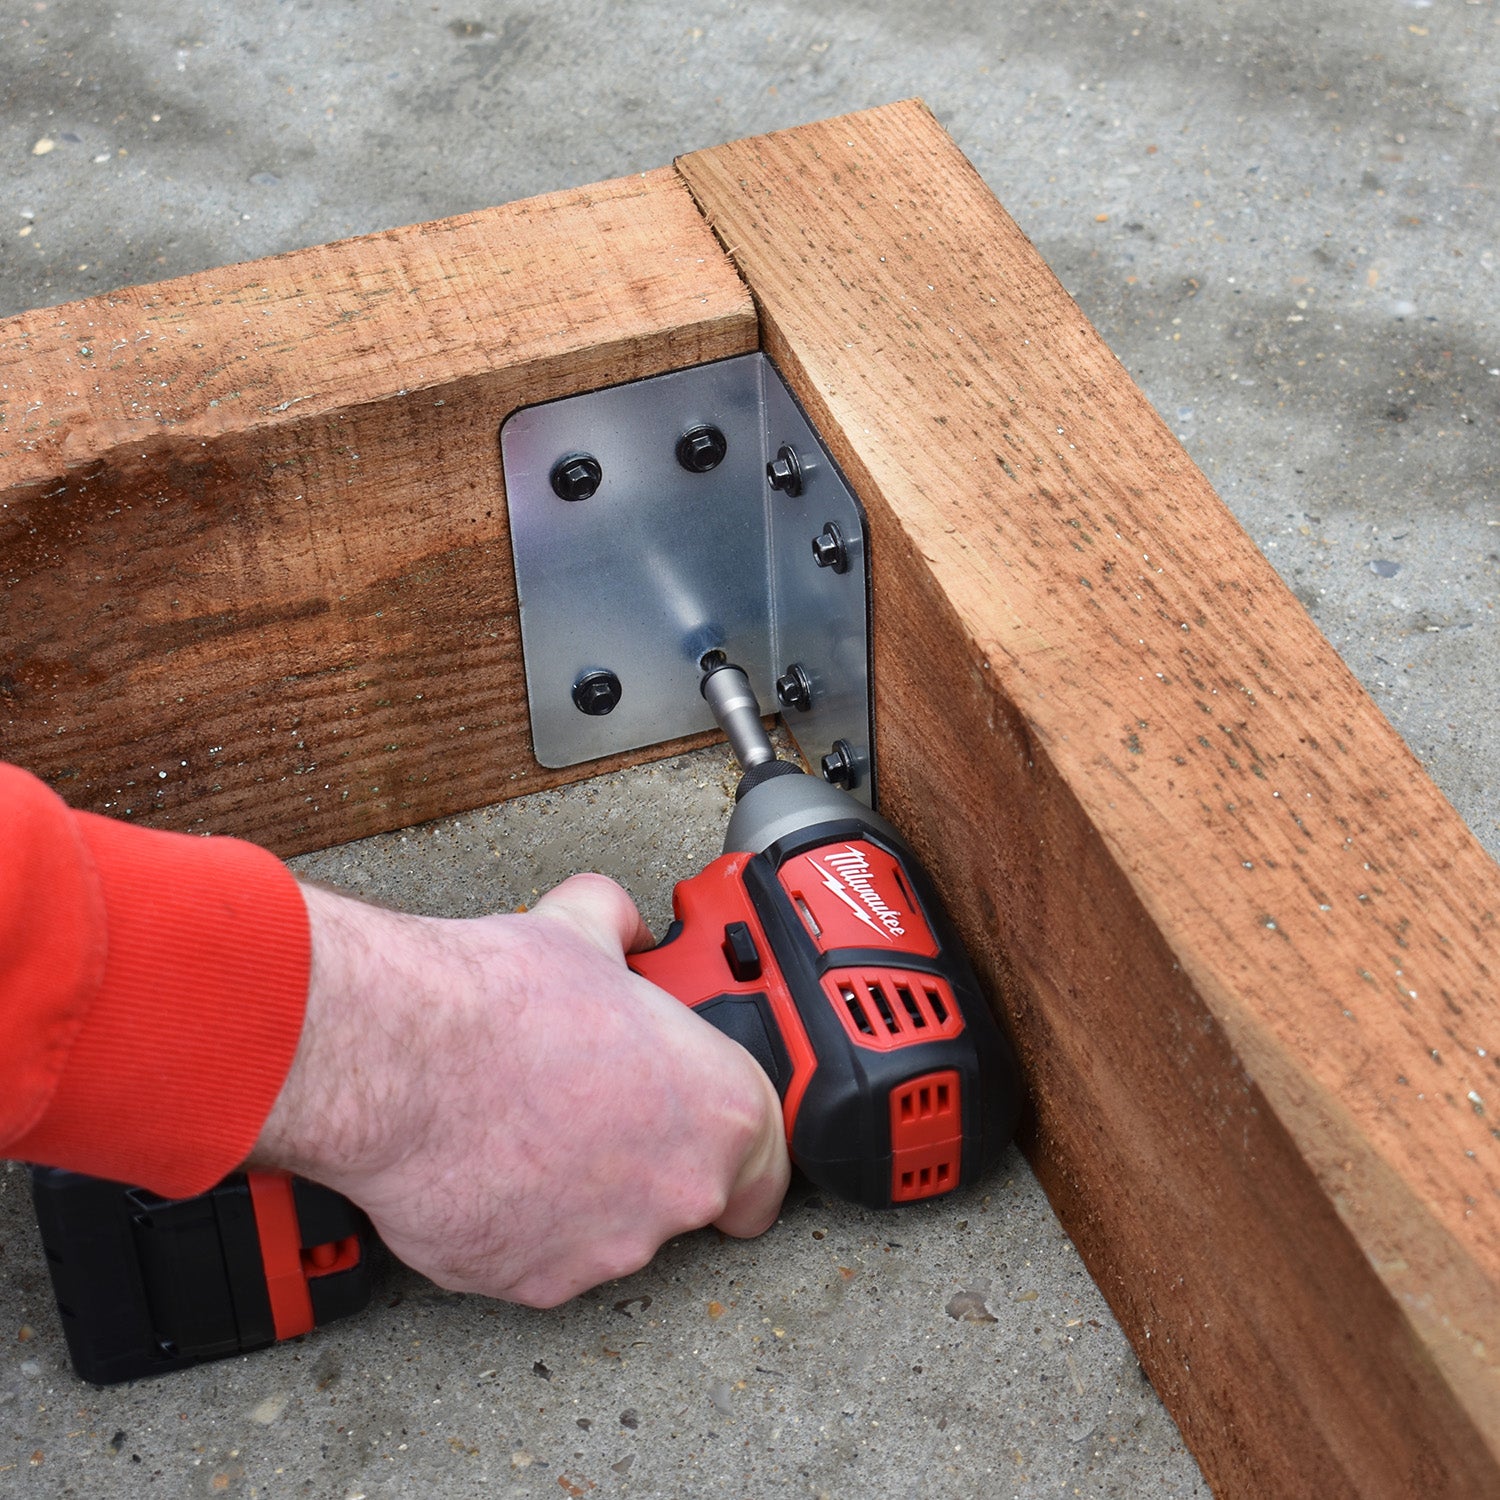 Shot of the bracket being installed on some timber sleepers, a man using a drill is visible.